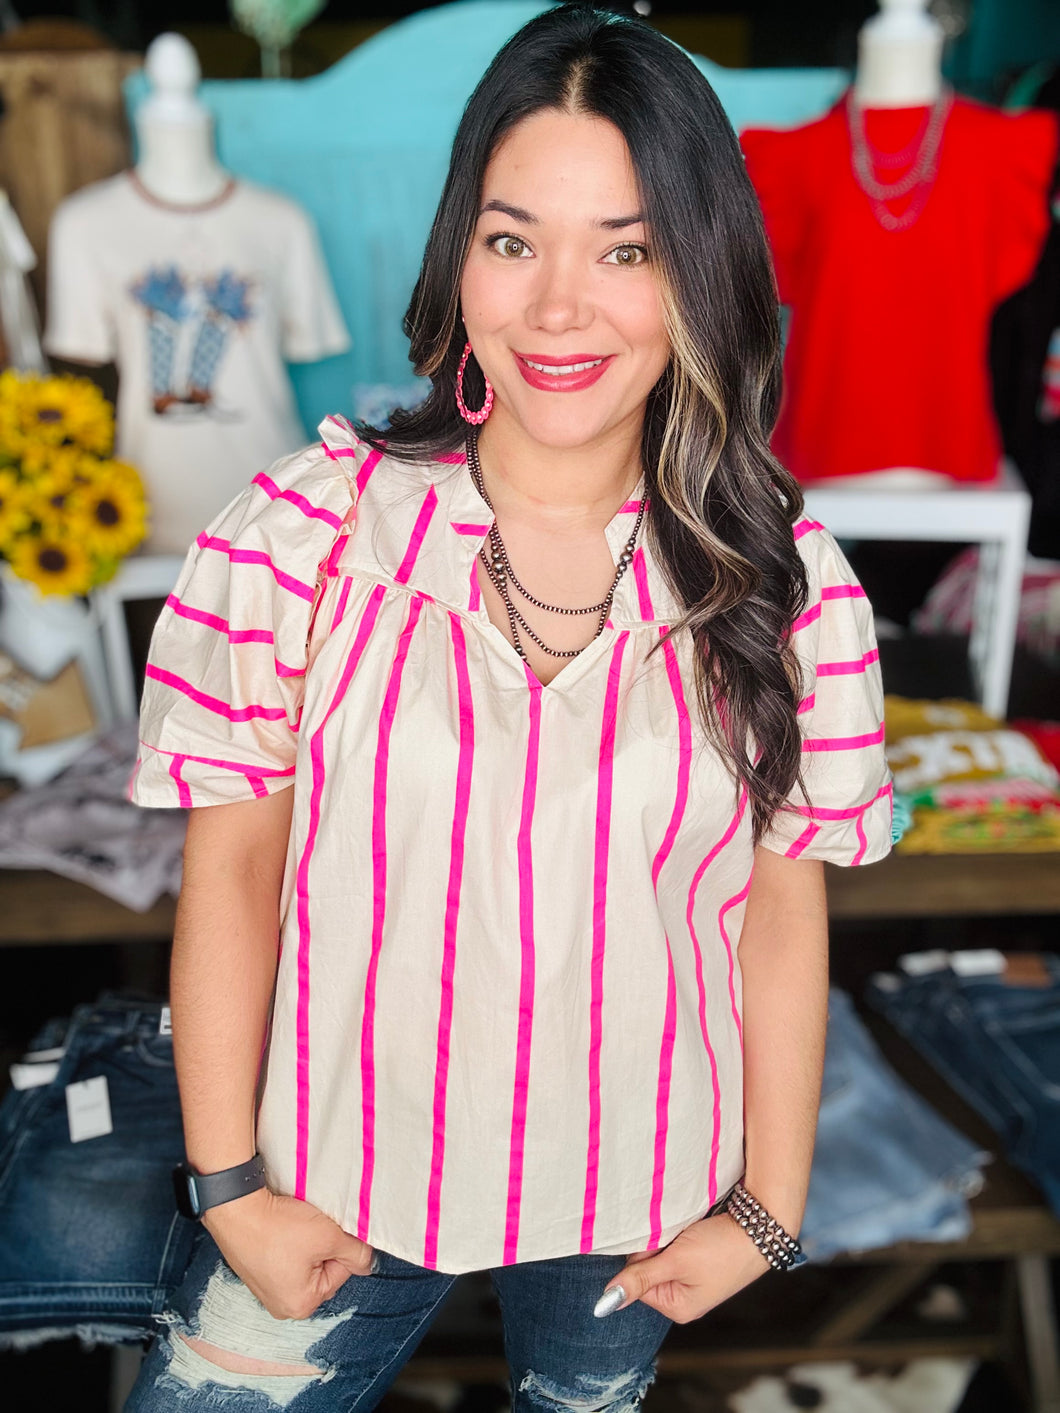 Neon Pink Striped Top